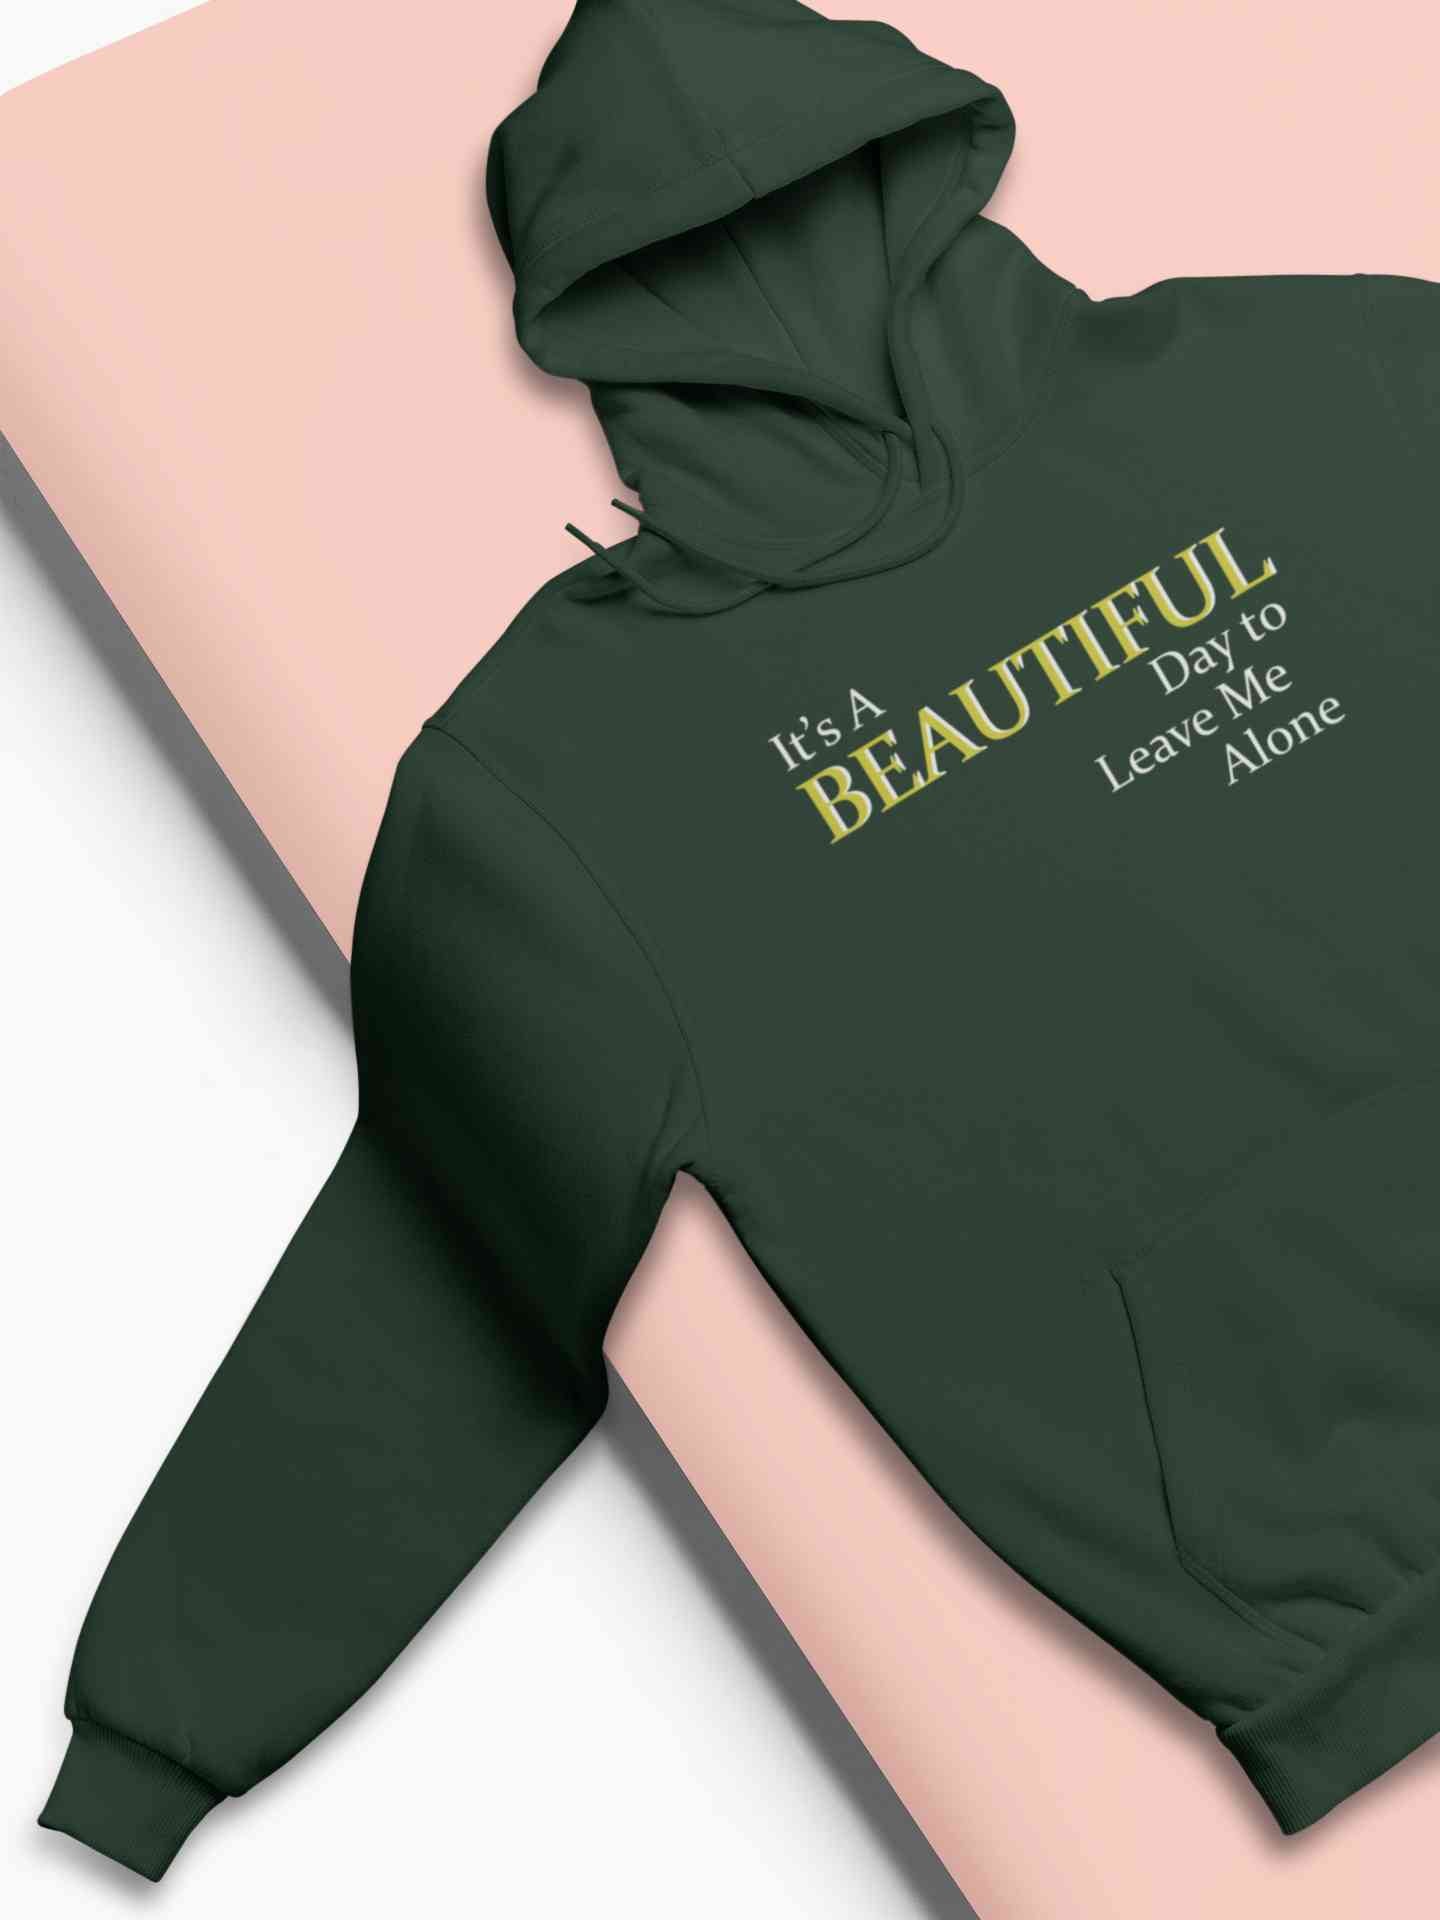 It Is A Beautiful Day To Leave Me Alone Hoodies for Women-FunkyTeesClub